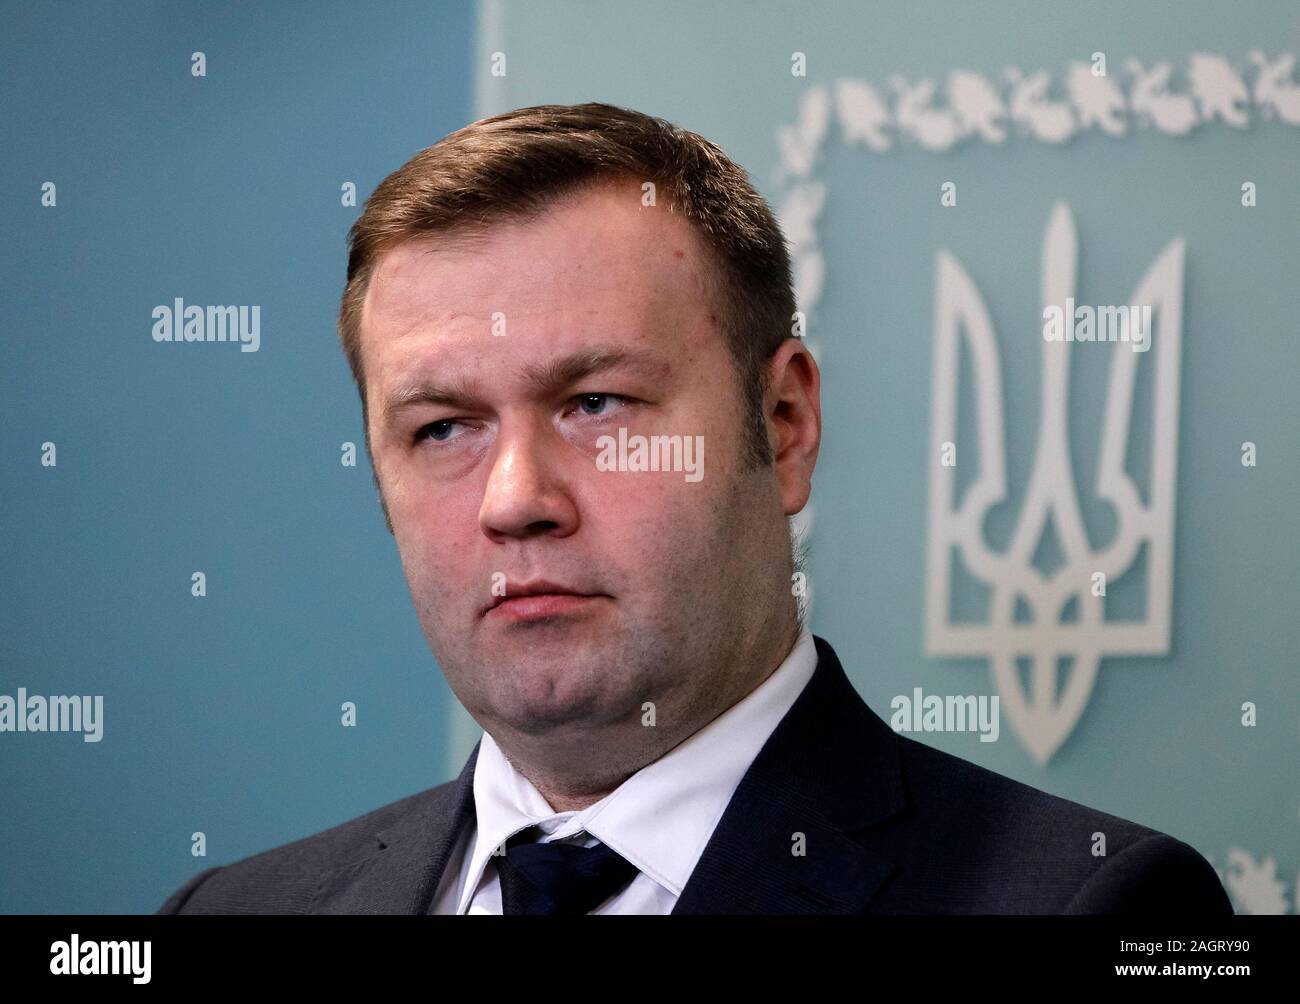 Ukrainian Minister of energy and environmental protection, Oleksiy Orzhel attends a press conference in Kiev.The European Union, Russia and Ukraine reached a final agreement about gas transit of Russian gas via Ukraine to Europe during the gas talks, reportedly by media. Stock Photo